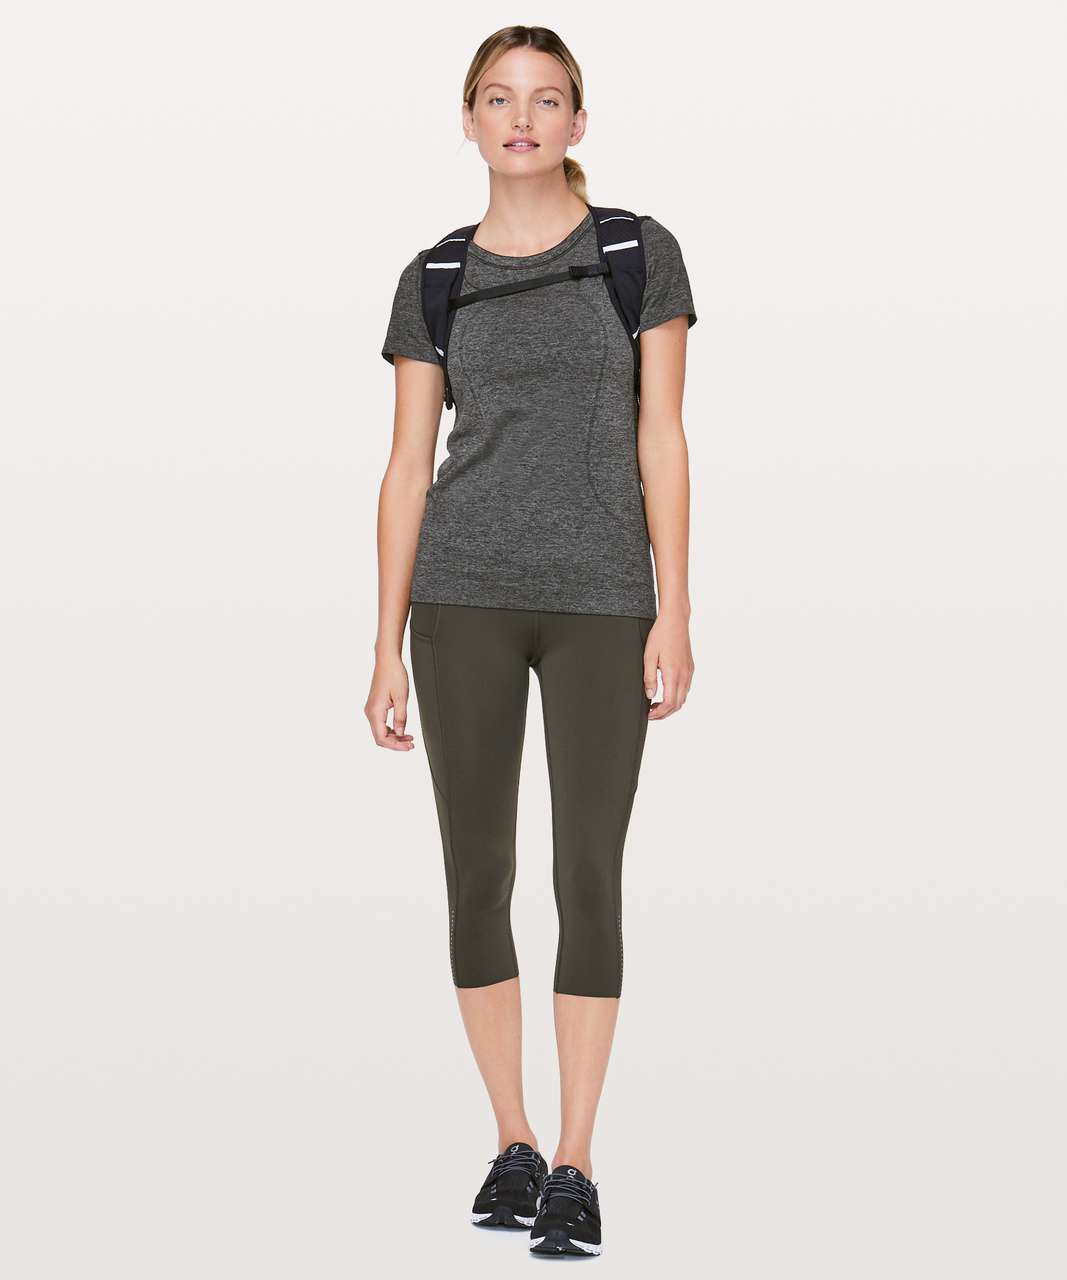 Lululemon Swiftly Tech Short Sleeve (Breeze) *Relaxed Fit - Black / Anchor